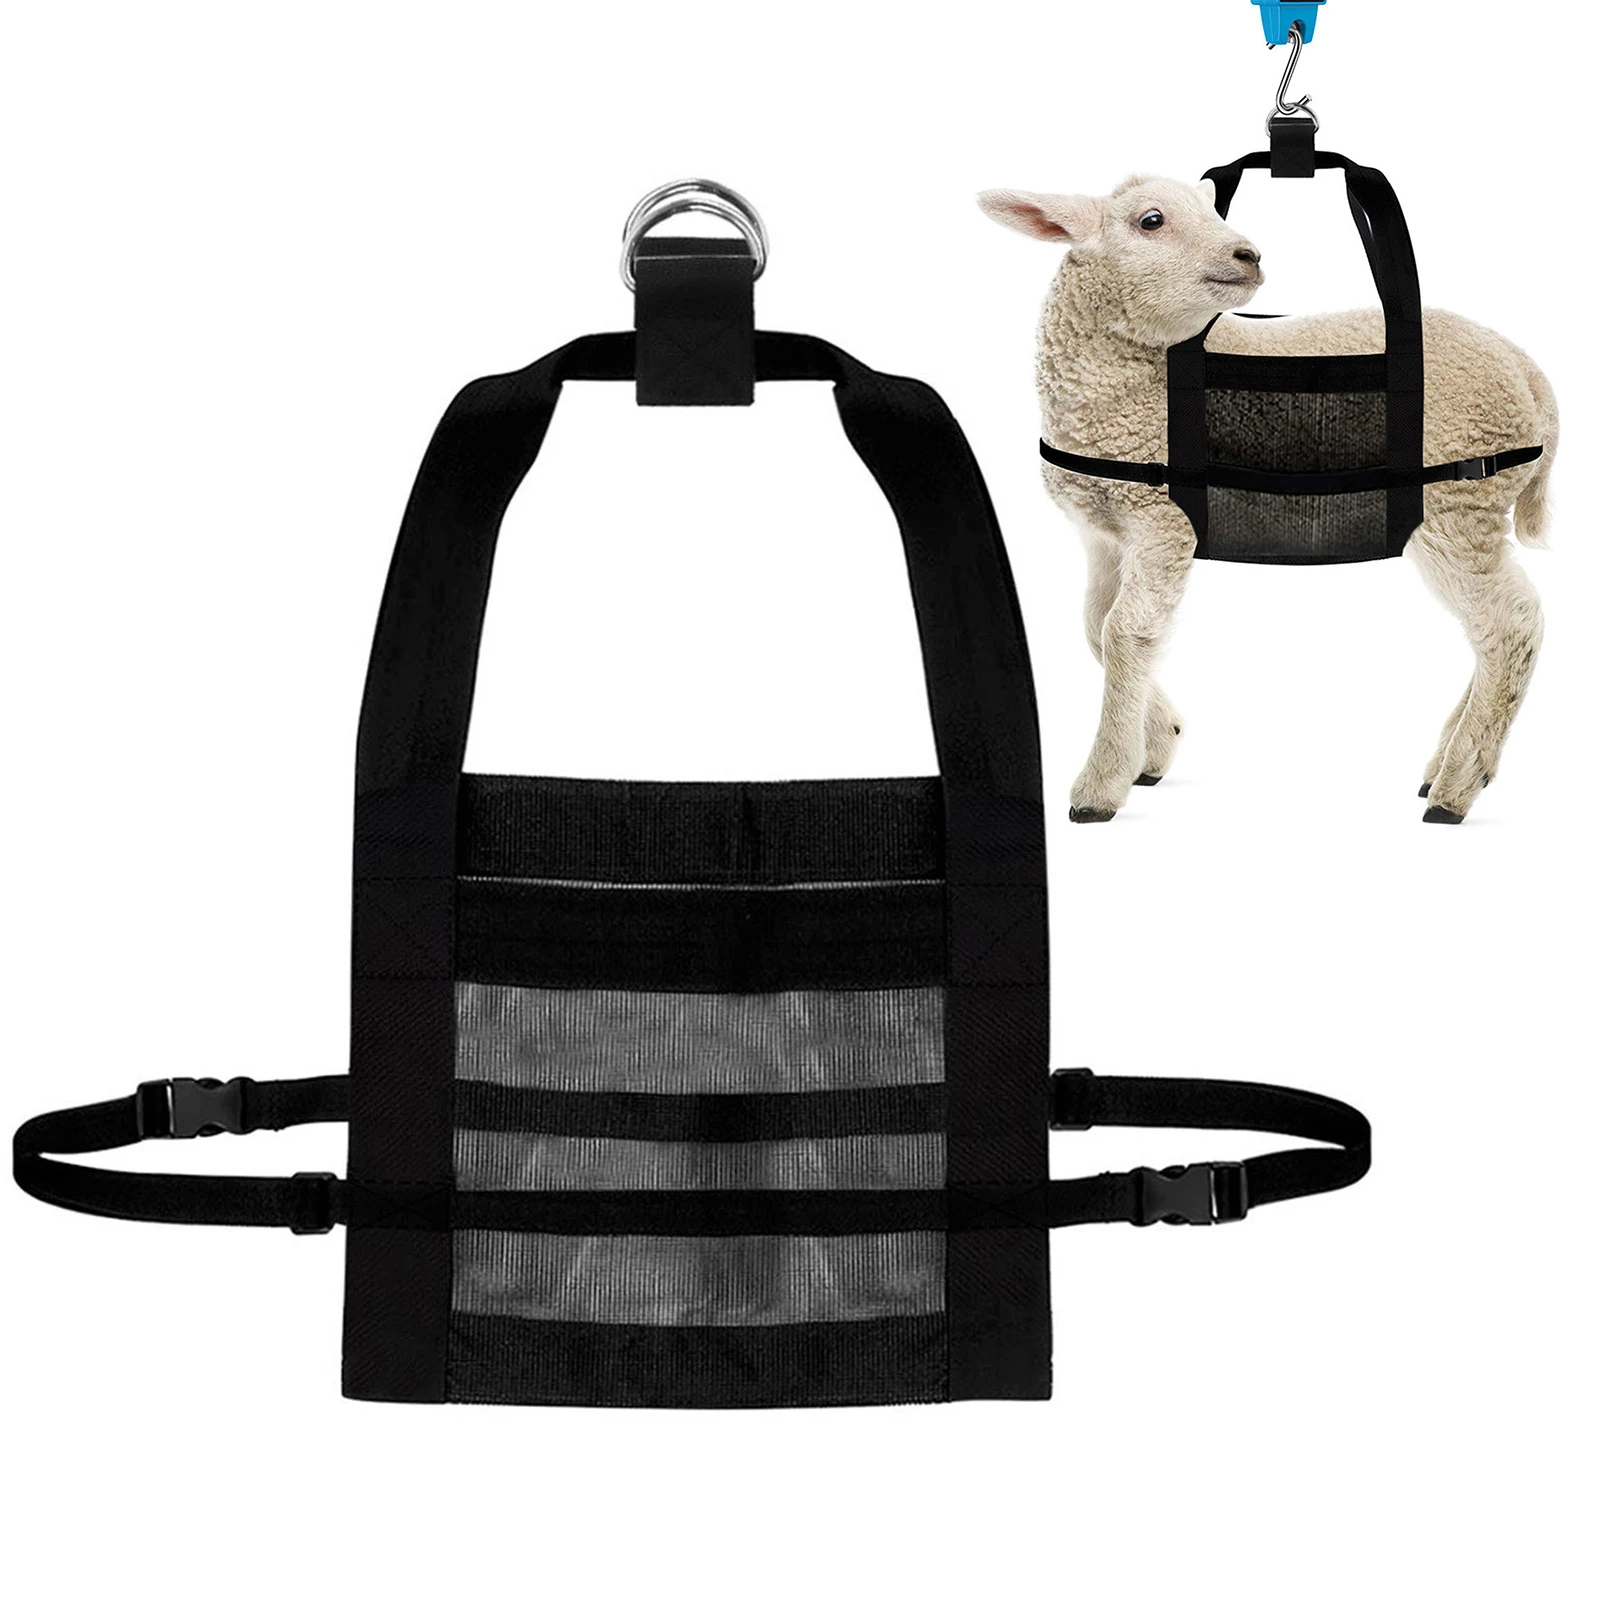 Weighing Scale Sling Durable Animal Scale Sling Bag Calf Scale Hang Weight  Scale Sling With Adjustable Strap For Newborn Farm| | - AliExpress